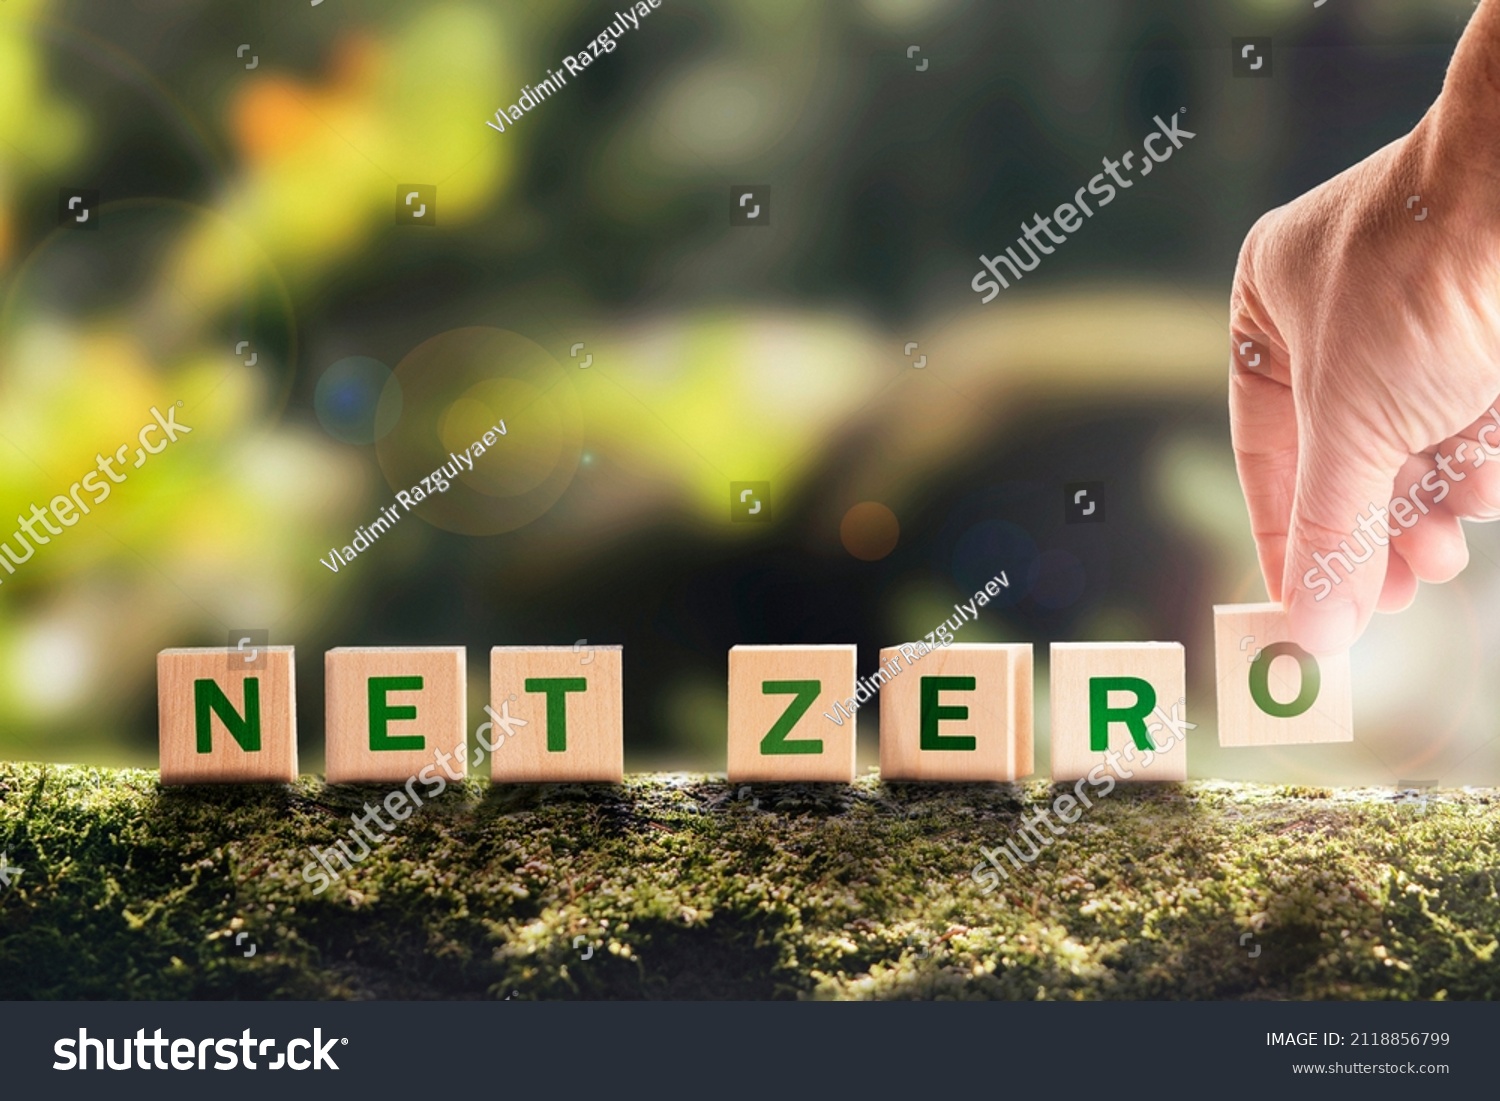 Net zero 2050 Carbon neutral. Net zero greenhouse gas emissions target. Climate neutral long strategy. No toxic gases. Hand puts wooden cubes with netzero icon in green background copy space. #2118856799